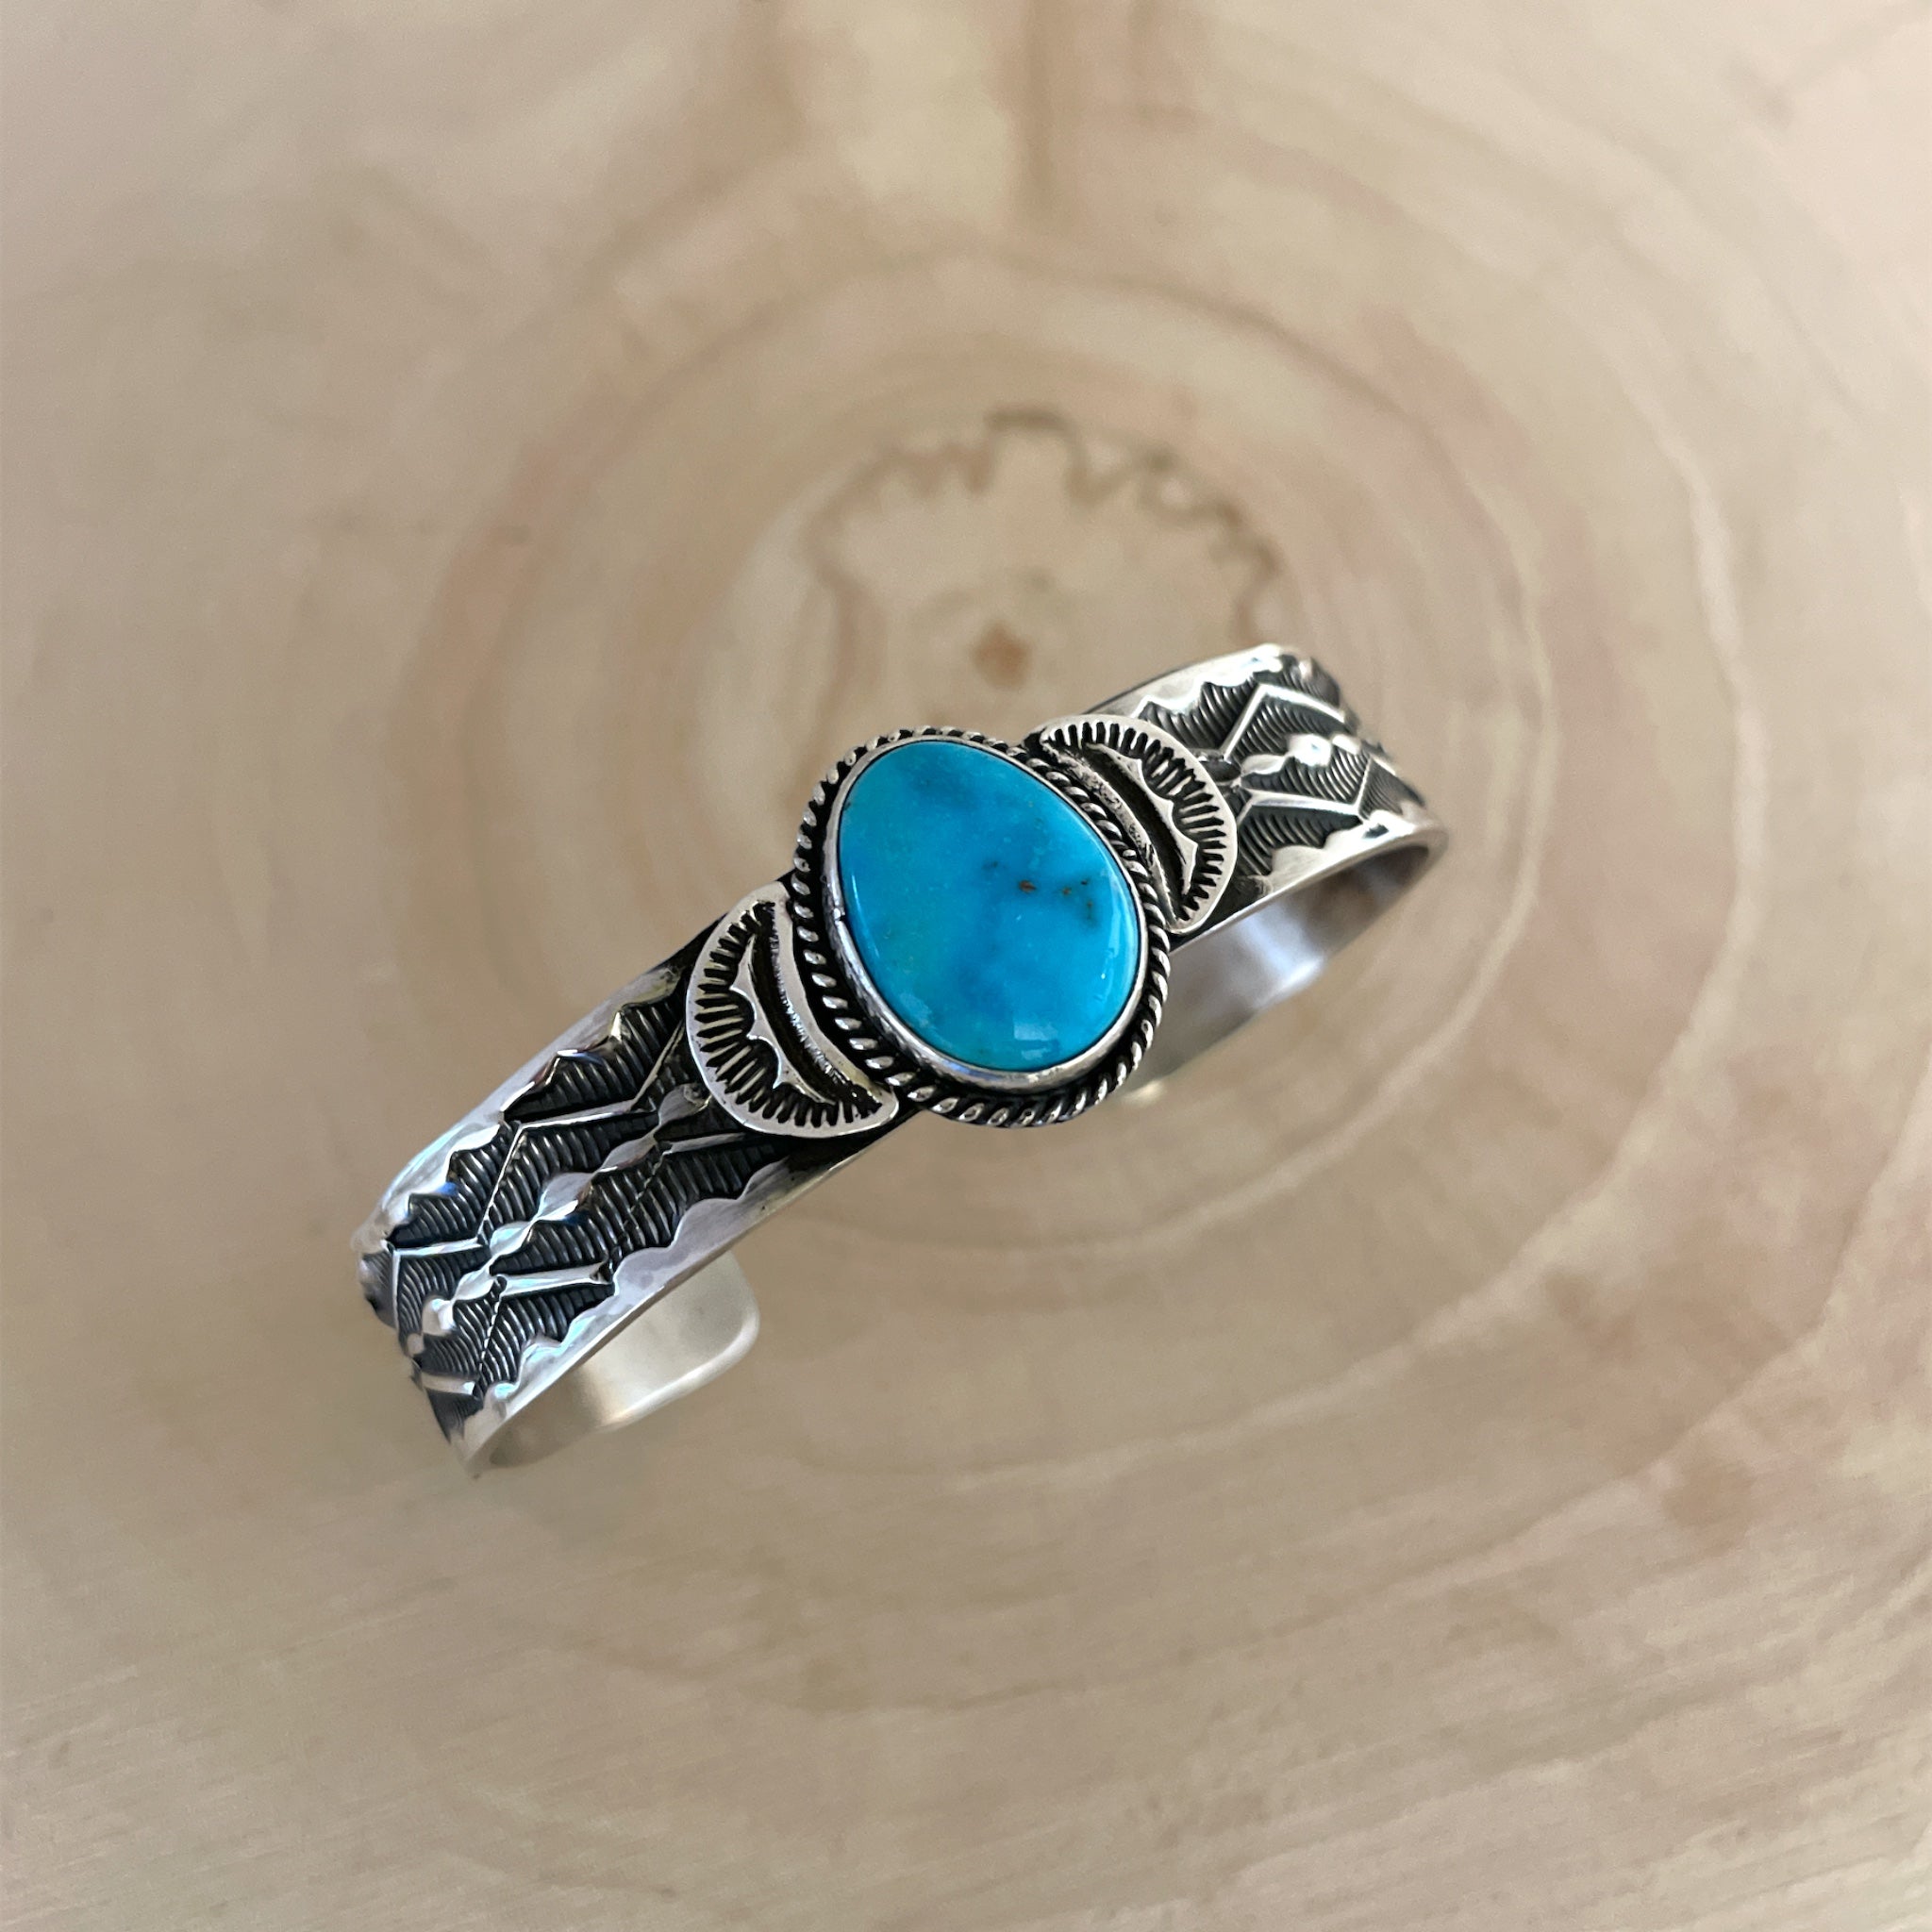 Stamped Kingman Turquoise Cuff Bracelet By Sunshine Reeves 5.43